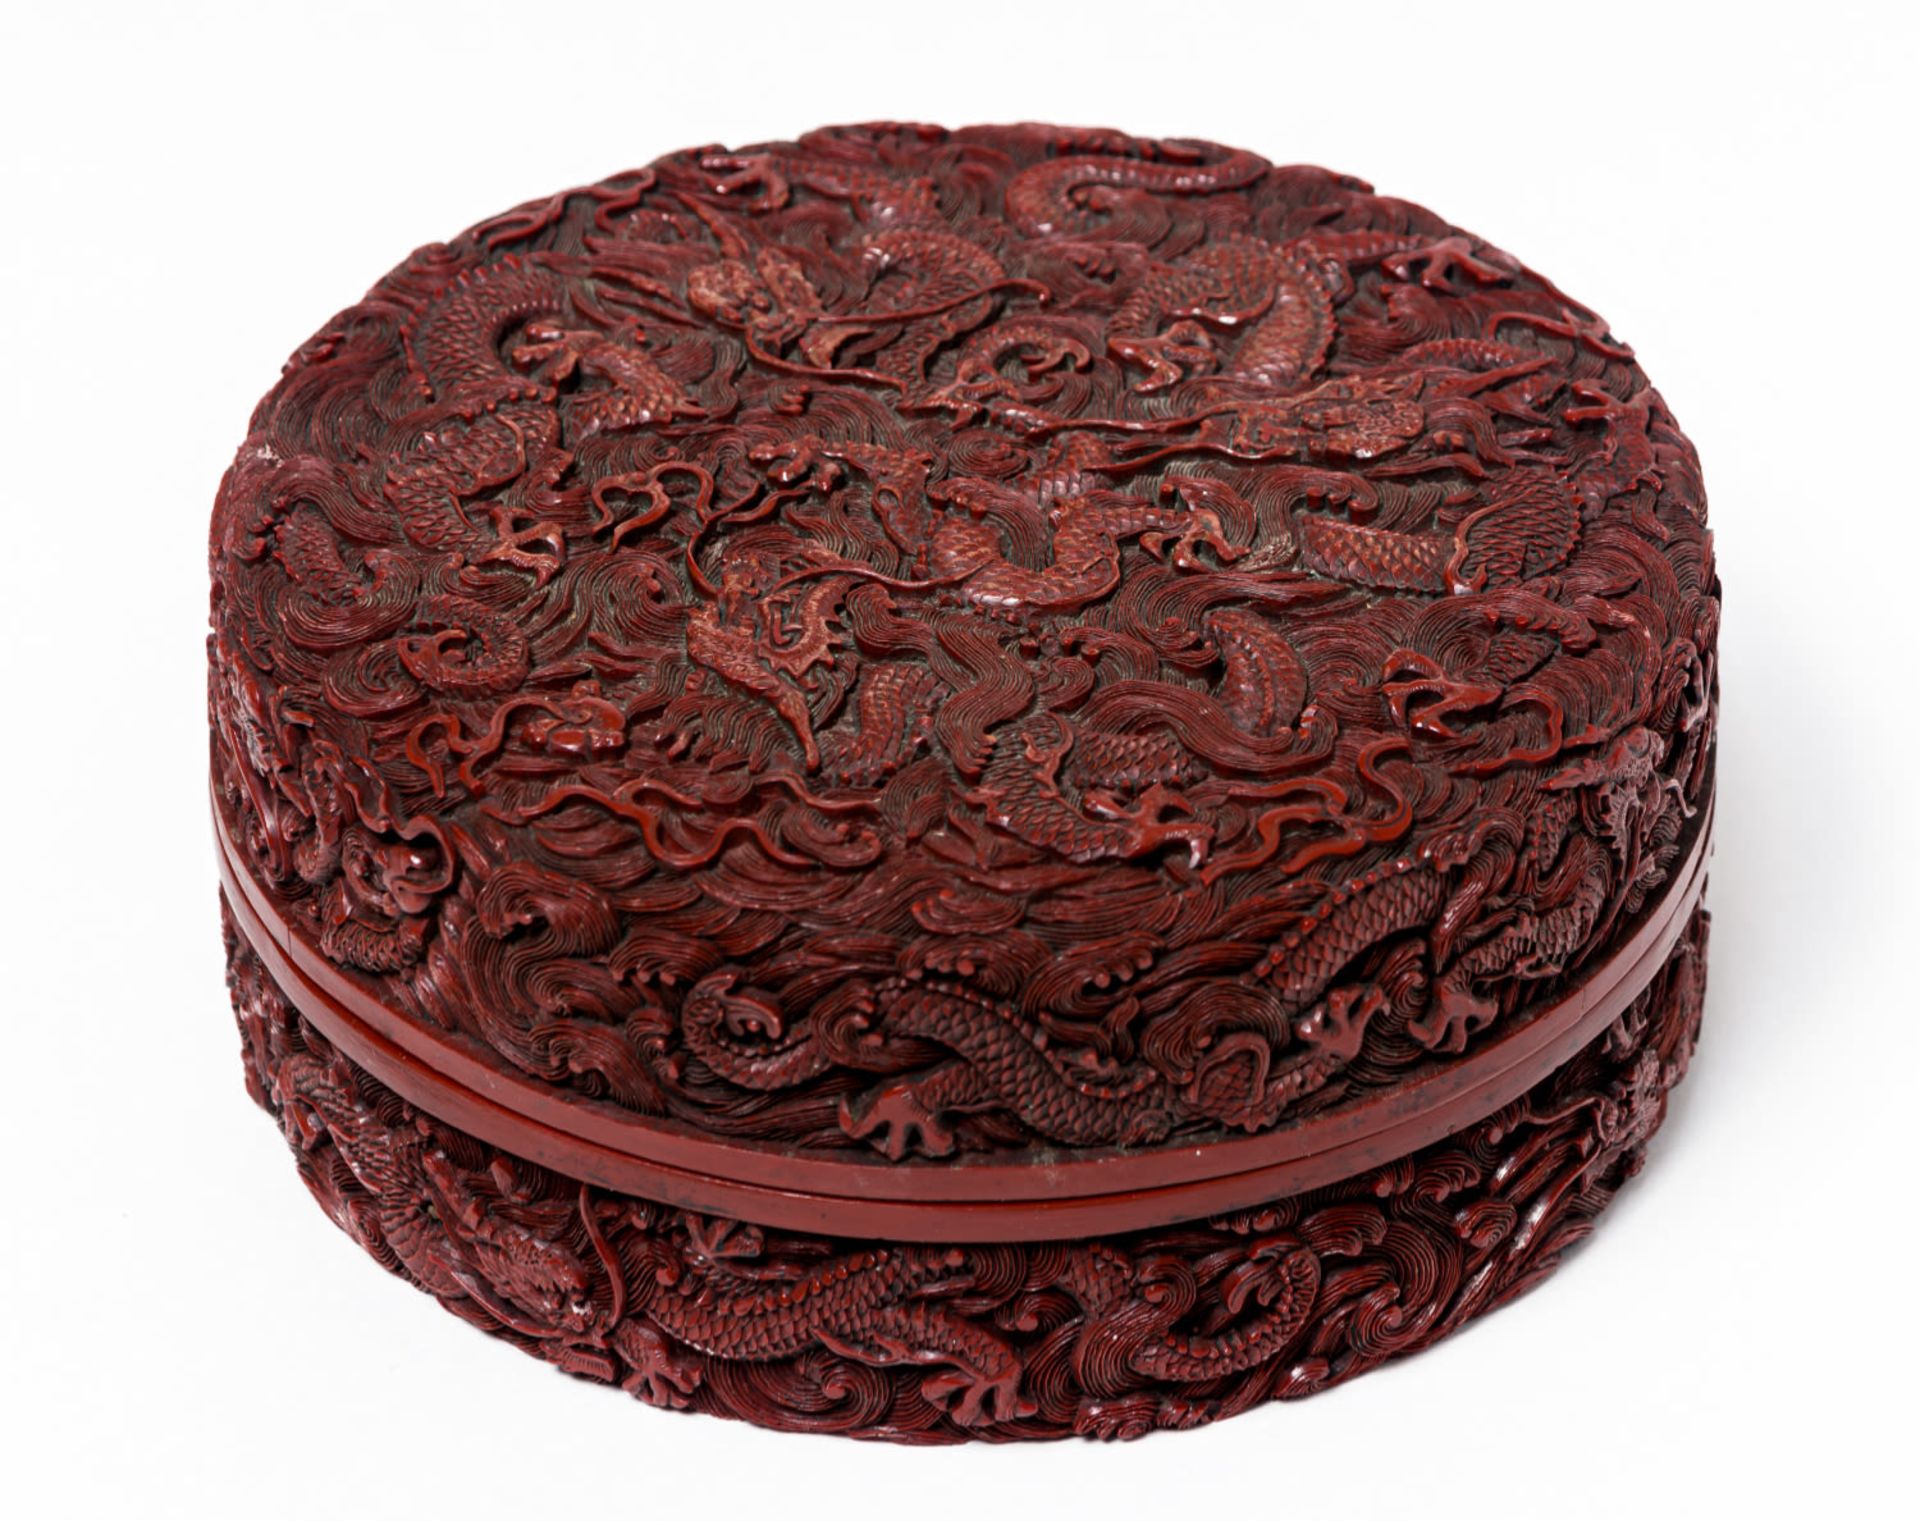 A CHINESE WOOD CARVED CINNABAR LACQUER BOX WITH 9 DRAGONS AND CH'IEN LUNG MARK